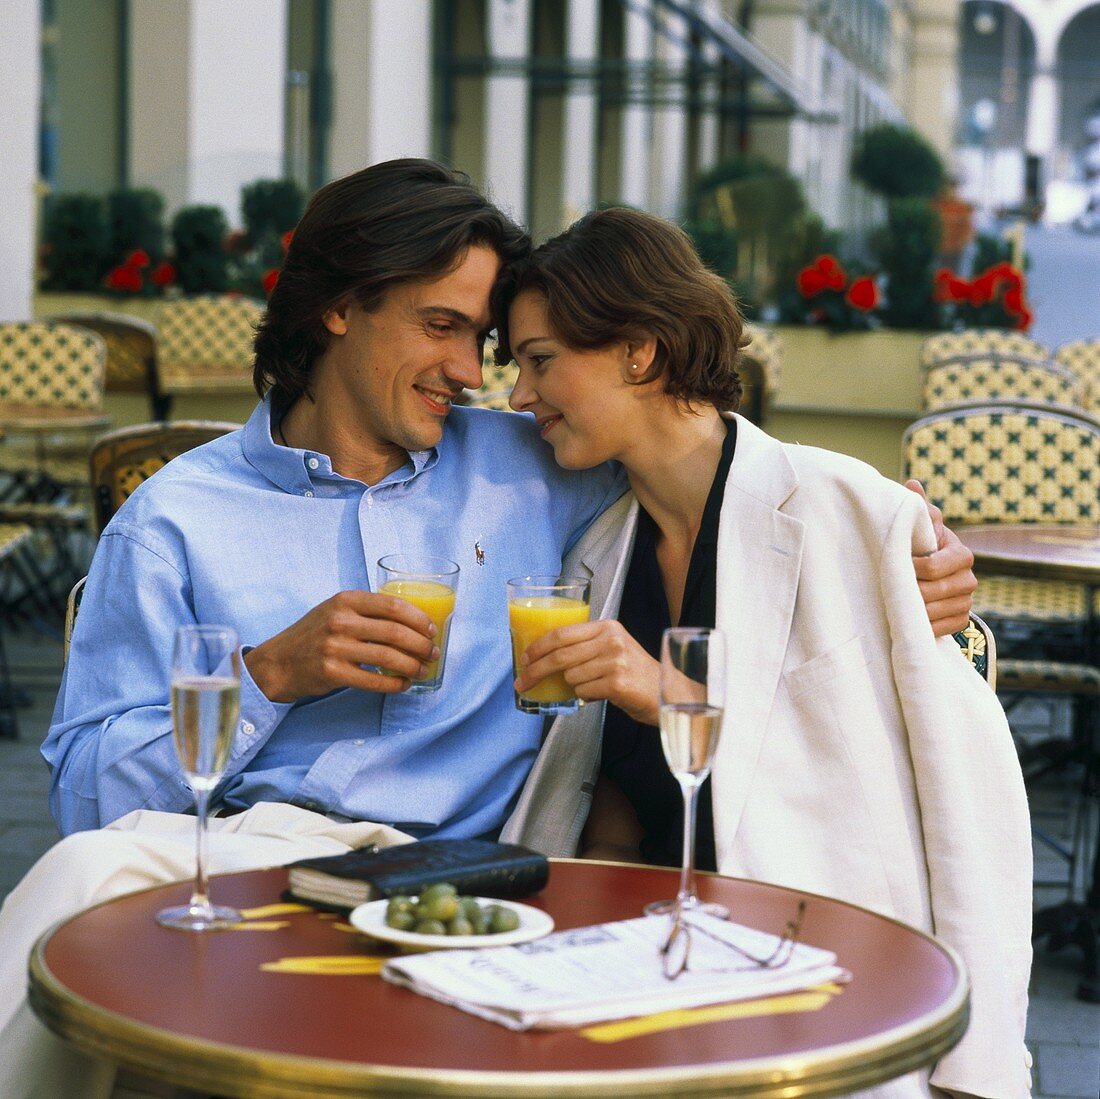 Young couple at café table with orange juice, champagne, olives